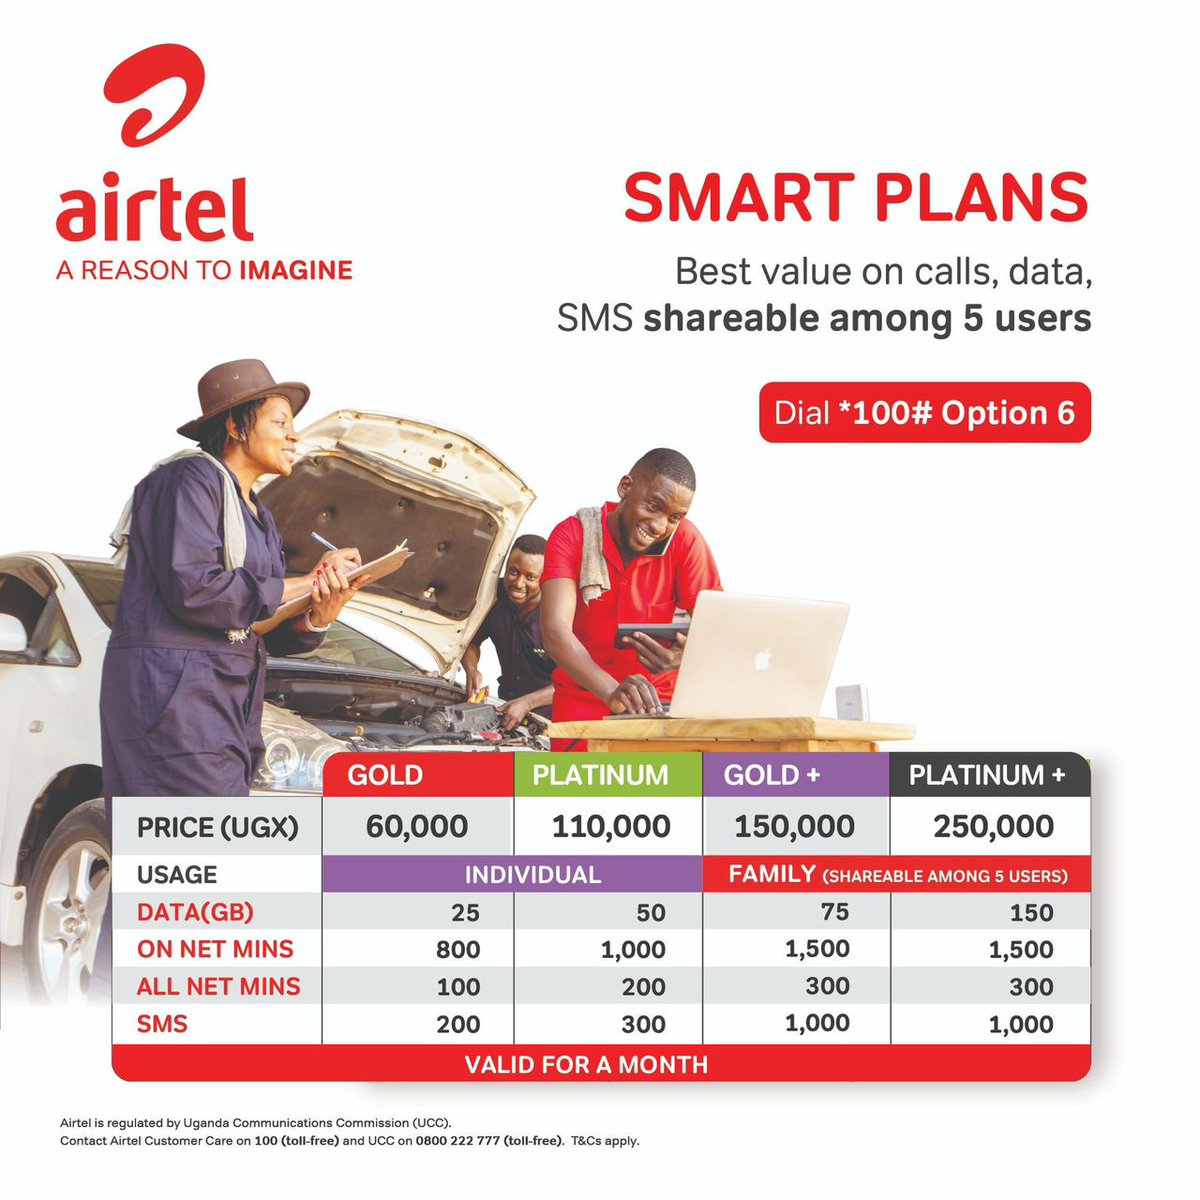 Grab our #AirtelSmartPlans all-in-one package now where from as low as 60k YOU GET: ✅25 GB ✅800 Mins to Airtel network ✅100 Mins to call other Networks ✅200 SMS Dial *100# option 6 to get your preferred package.